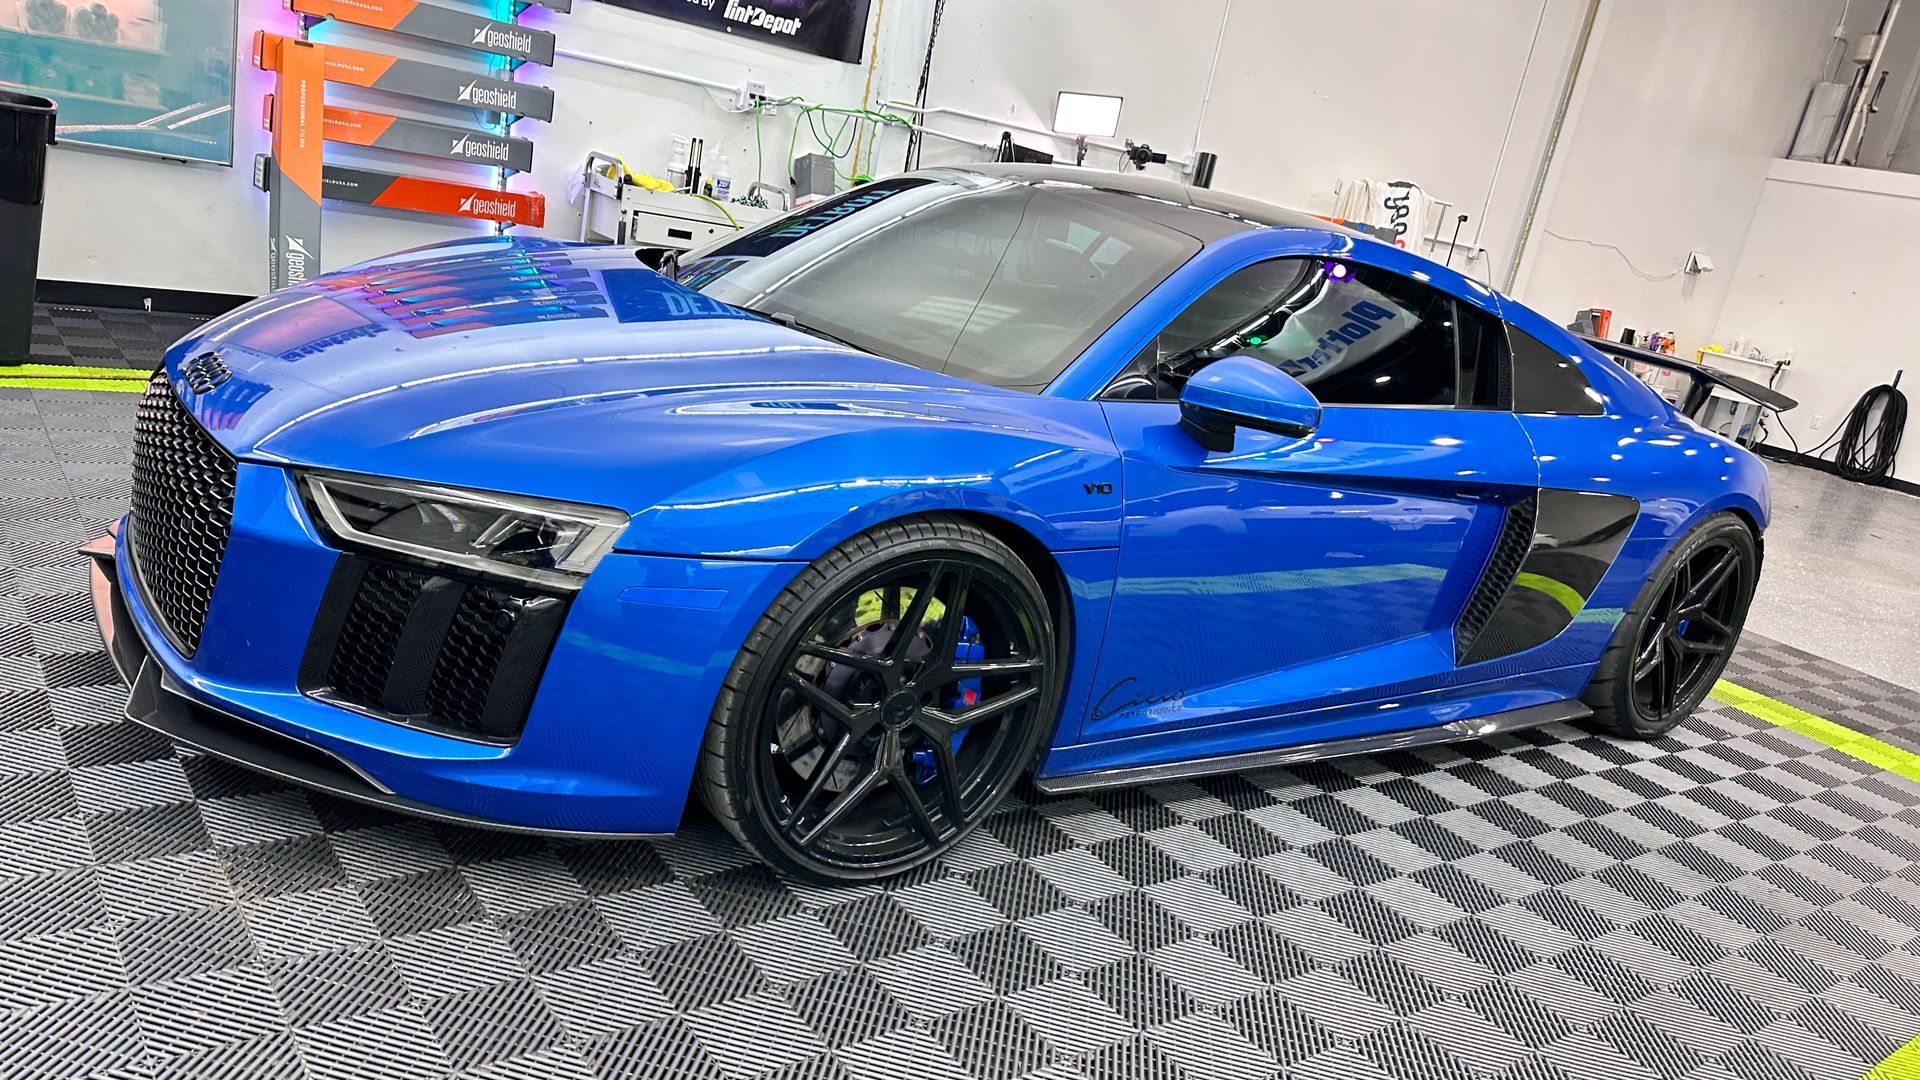 A blue audi r8 is parked on a checkered floor in a garage.